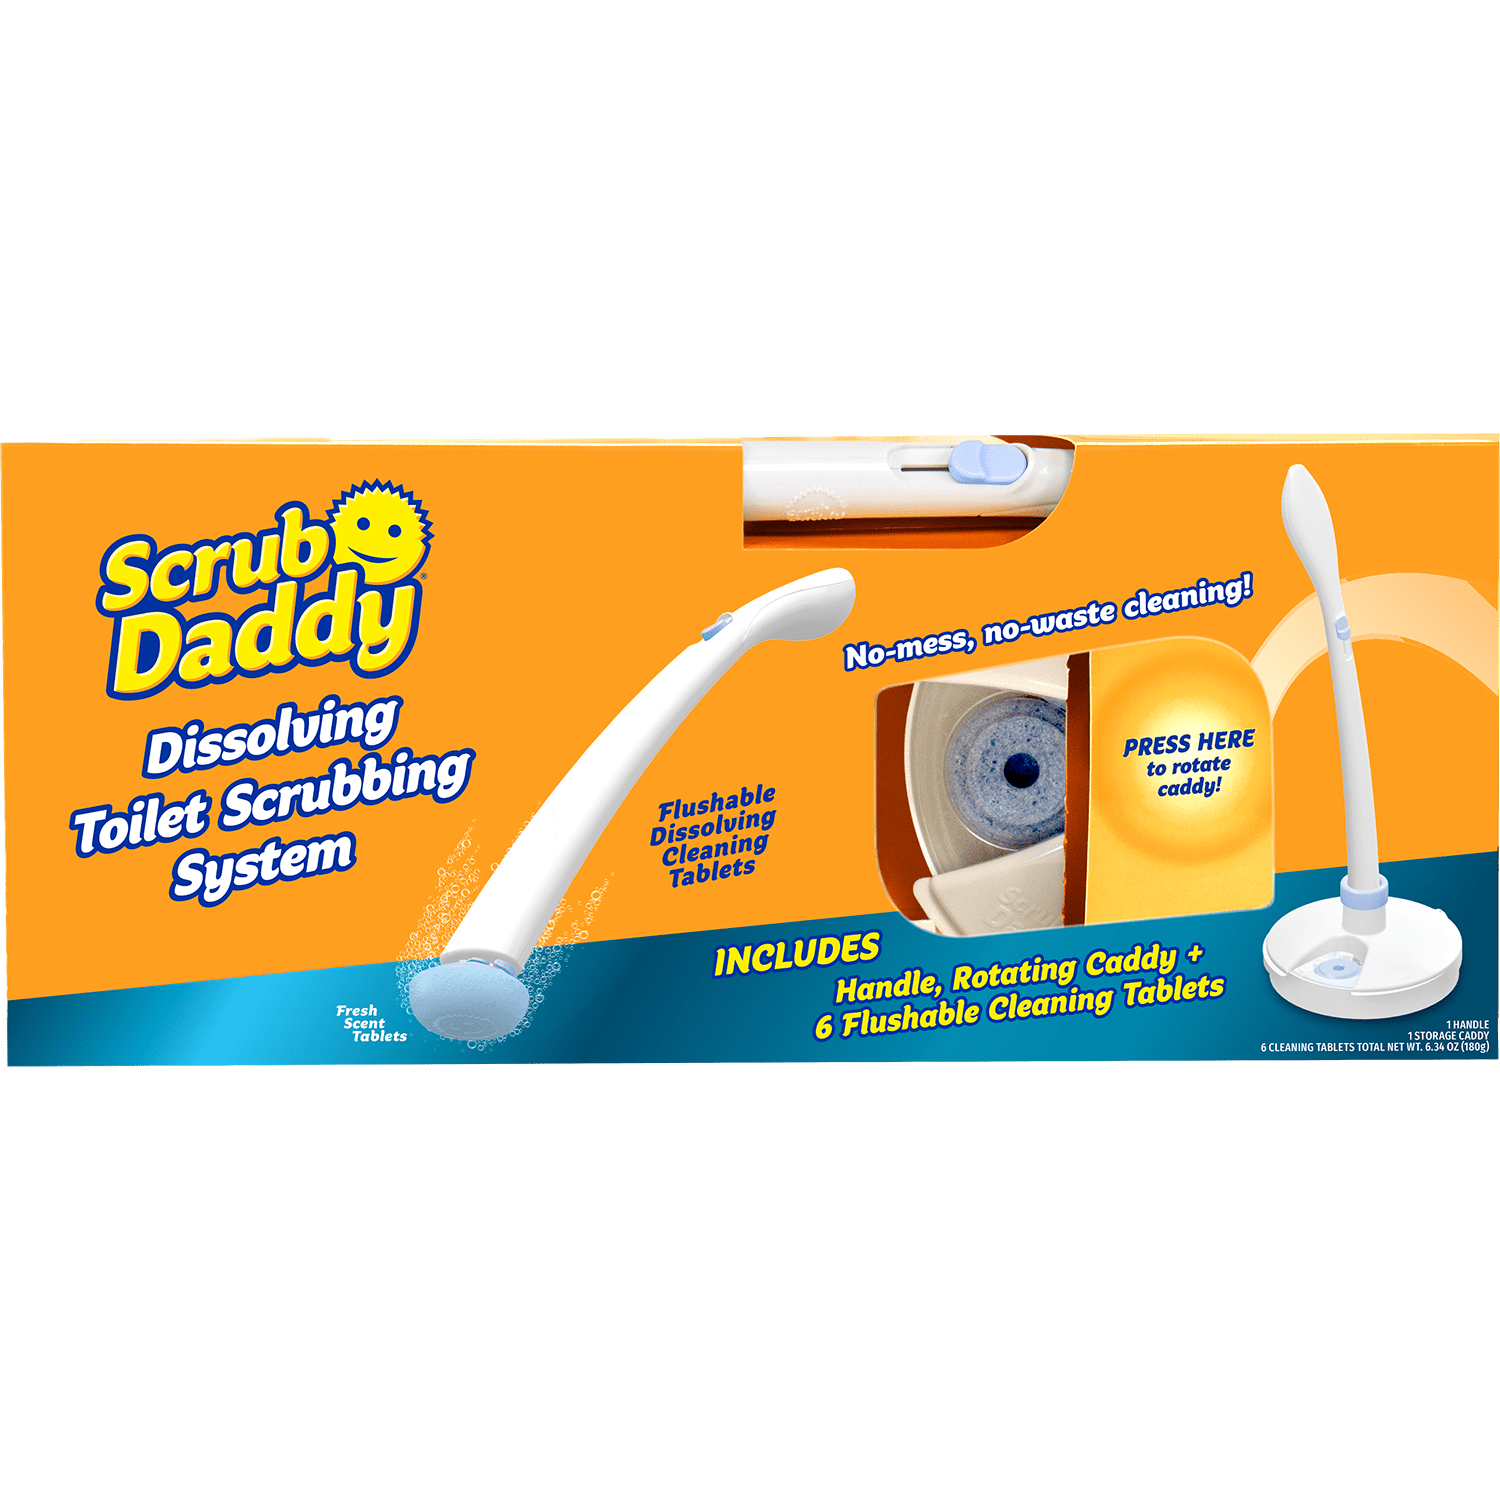 TESTING OUT THE NEW SCRUB DADDY TOILET WAND SYSTEM! IS IT ANY GOOD ???  #cleanwithme #cleaning 